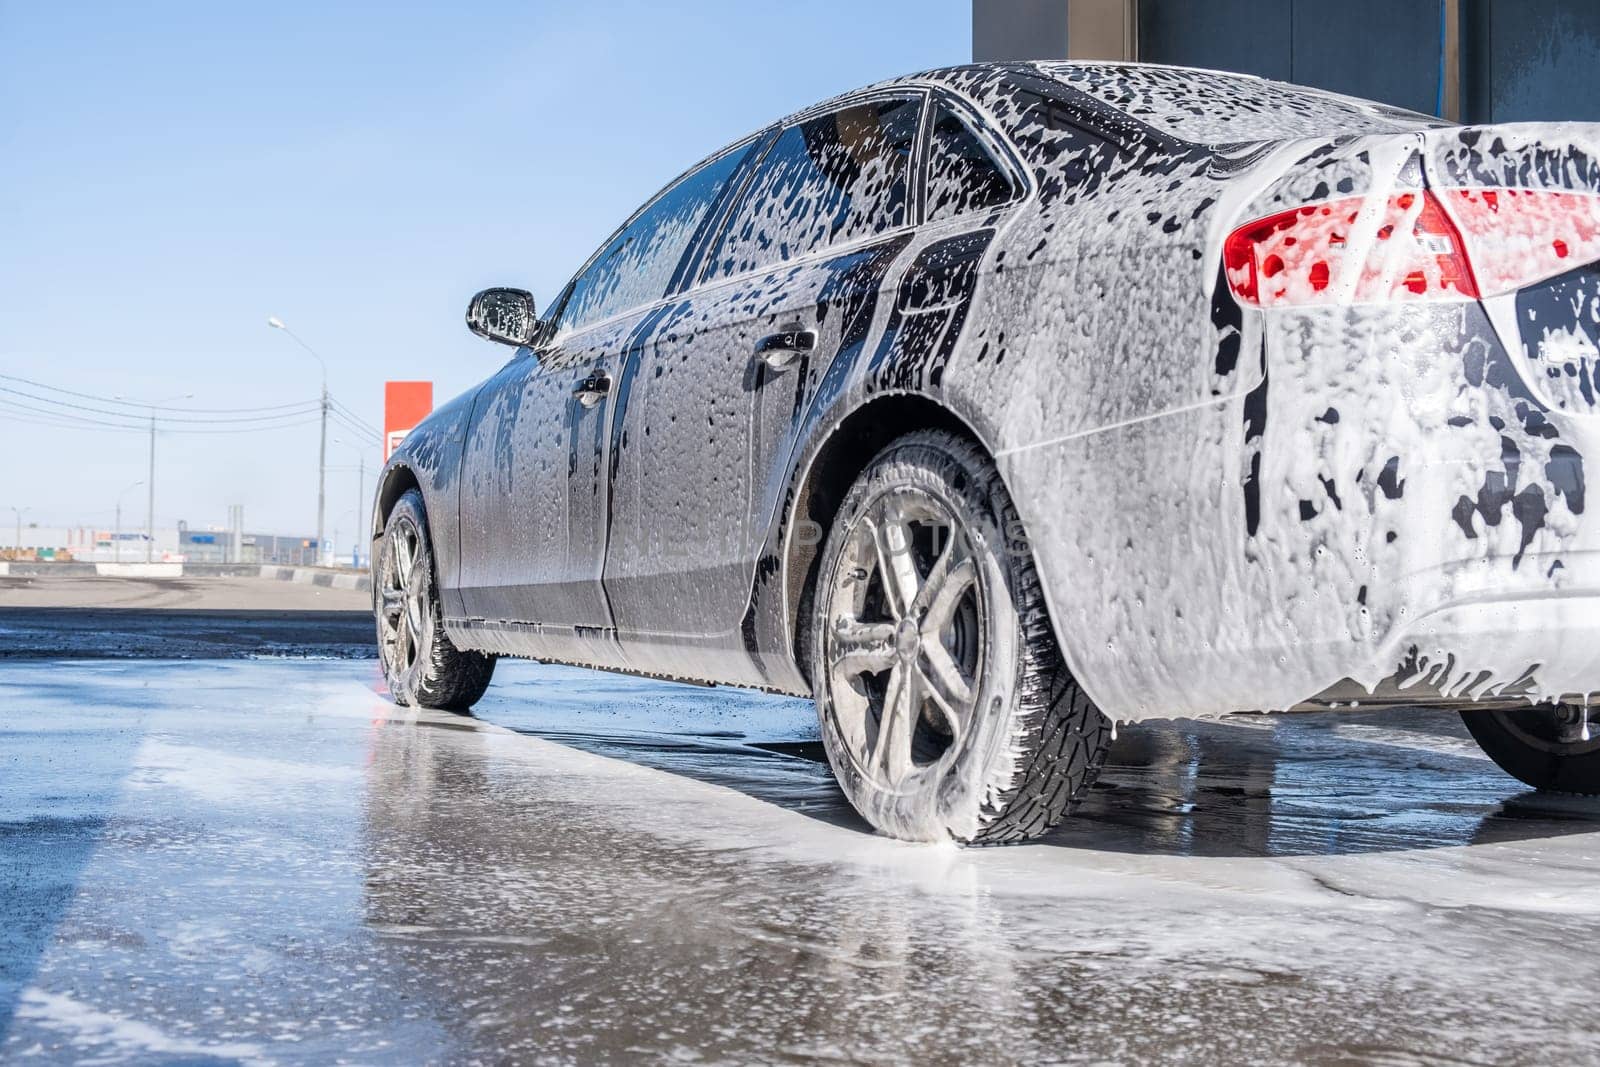 A vehicle is engulfed in soapy foam during a car wash, covering the tires, wheels, hood, and entire exterior of the car. Self-service car wash